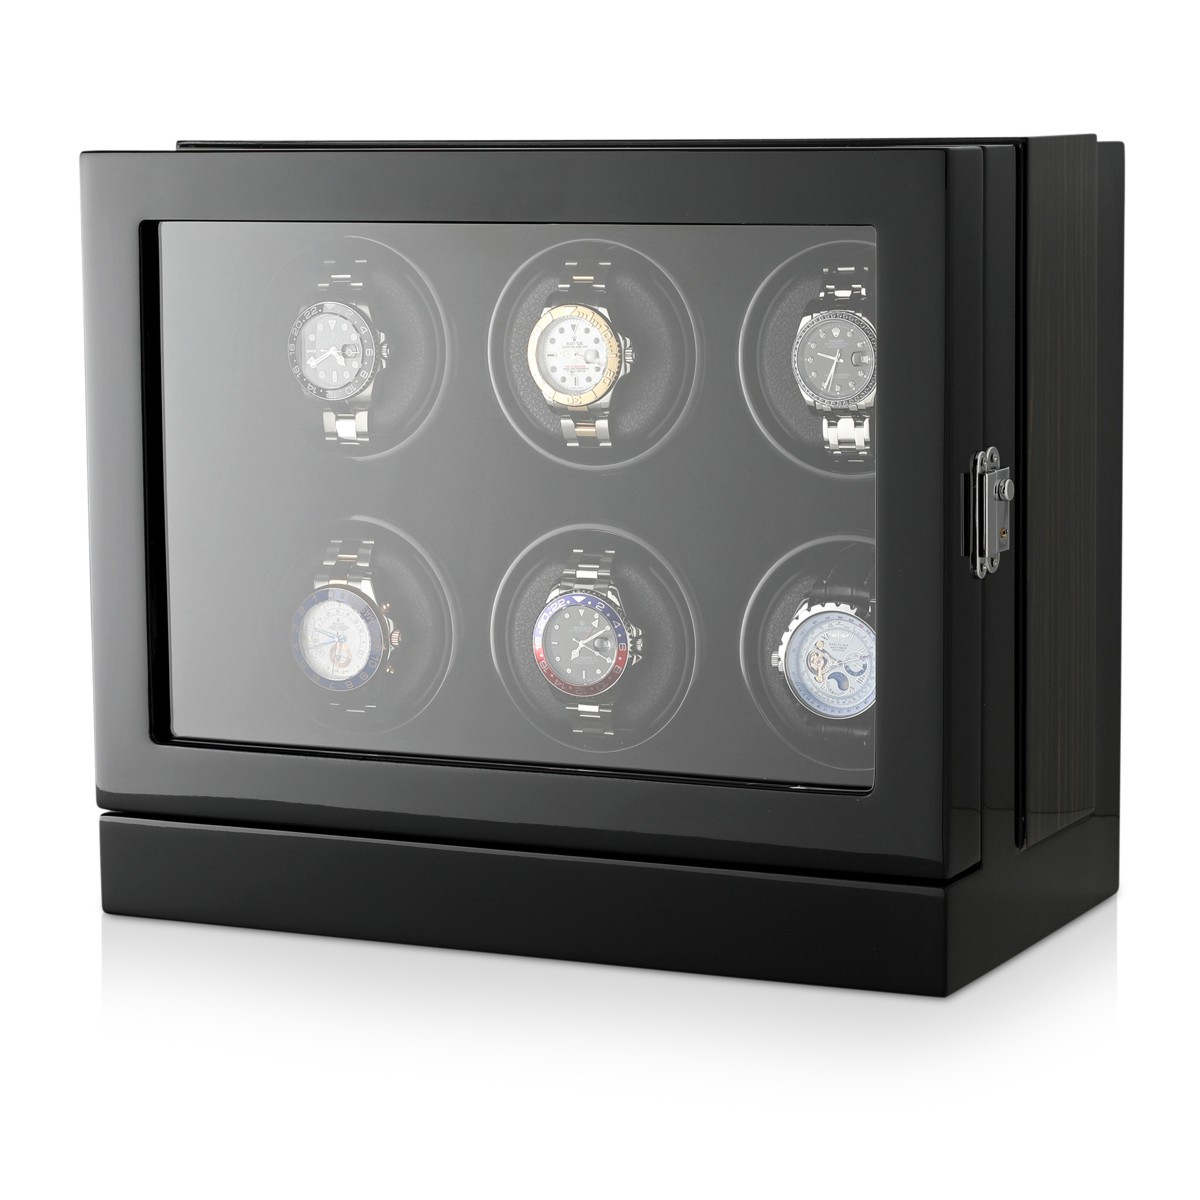 6 Watch Winder Box WW-8203-BMB for Automatic Watches